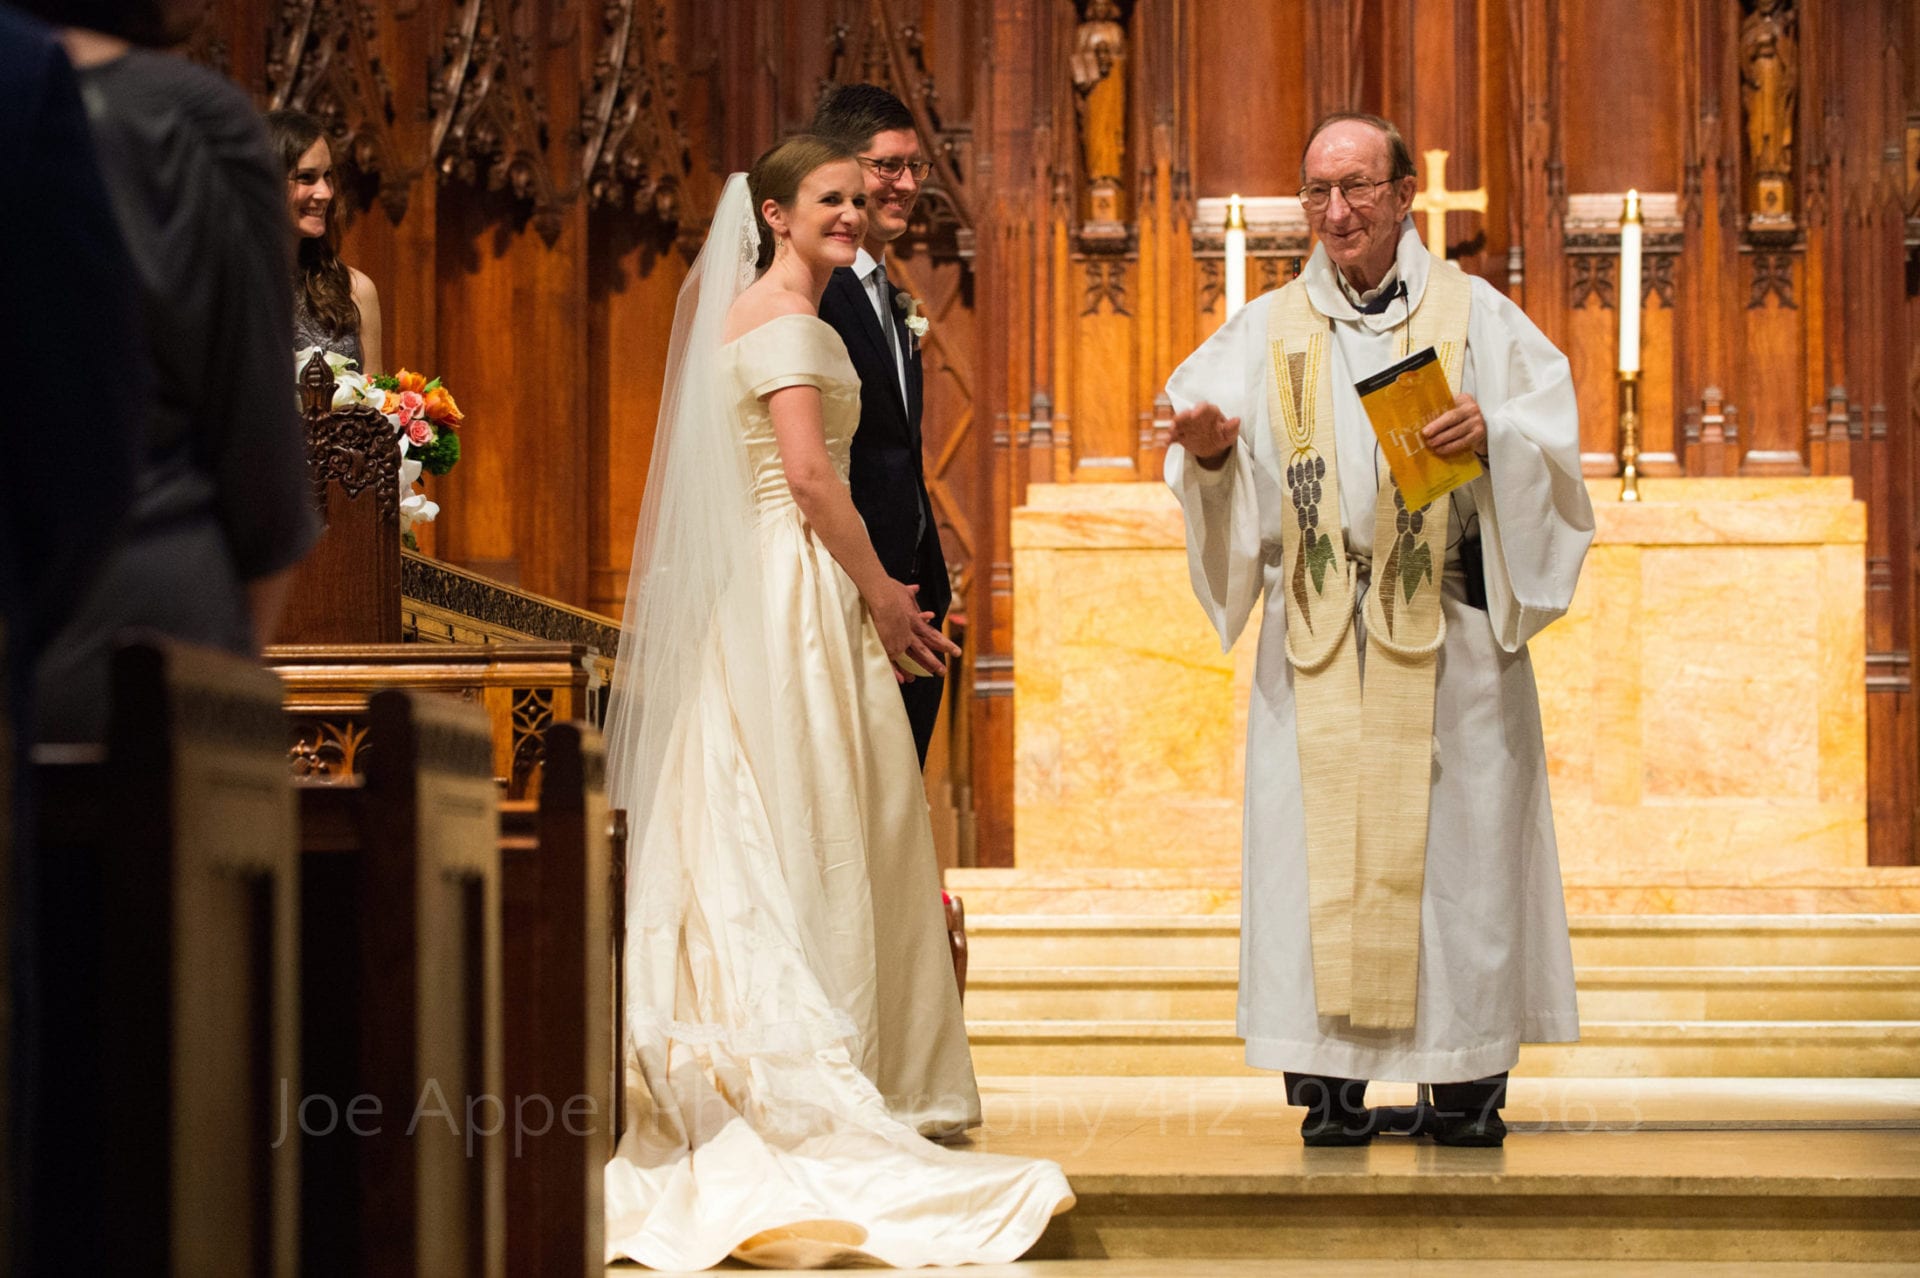 An old priest talks to the congregation as a smiling young bride and groom stand side-by-side at a right angle to him on the altar during their Heinz Chapel wedding.